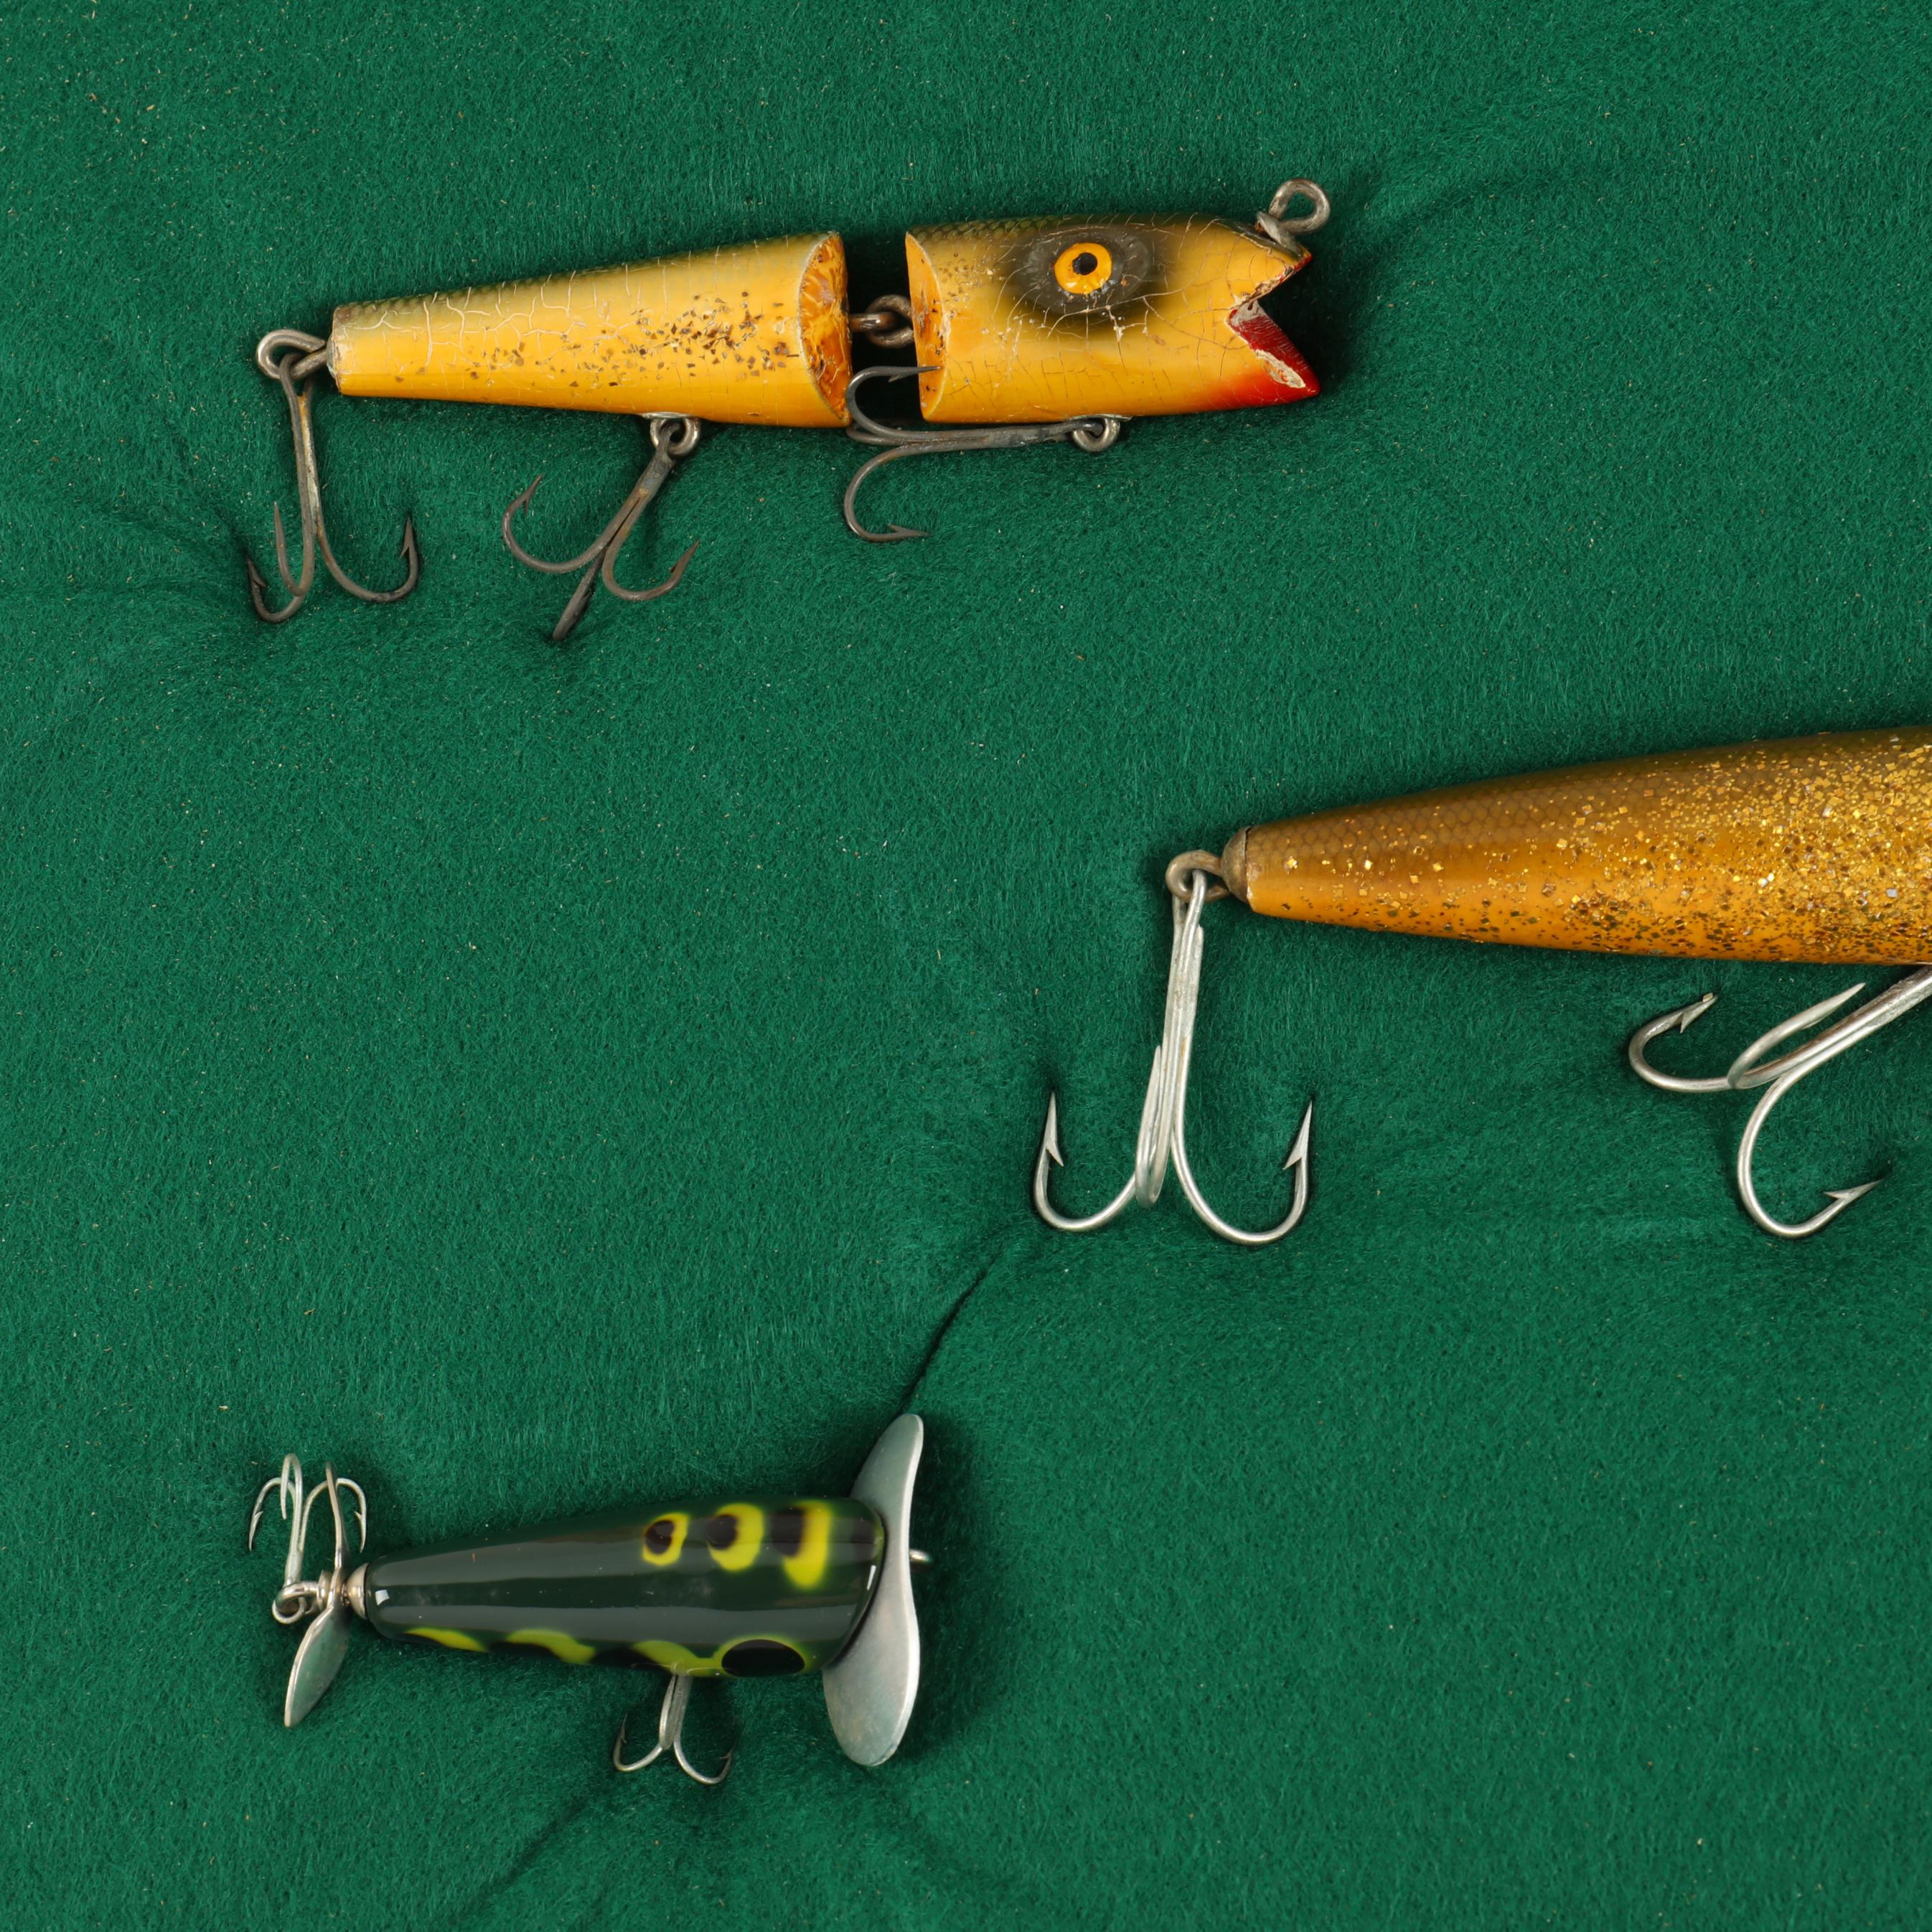 Vintage Fishing Lure Collection in Shadow Boxes (Lot 1270 - The Winter Decoy  & Sporting Art AuctionMar 3, 2022, 12:00pm)